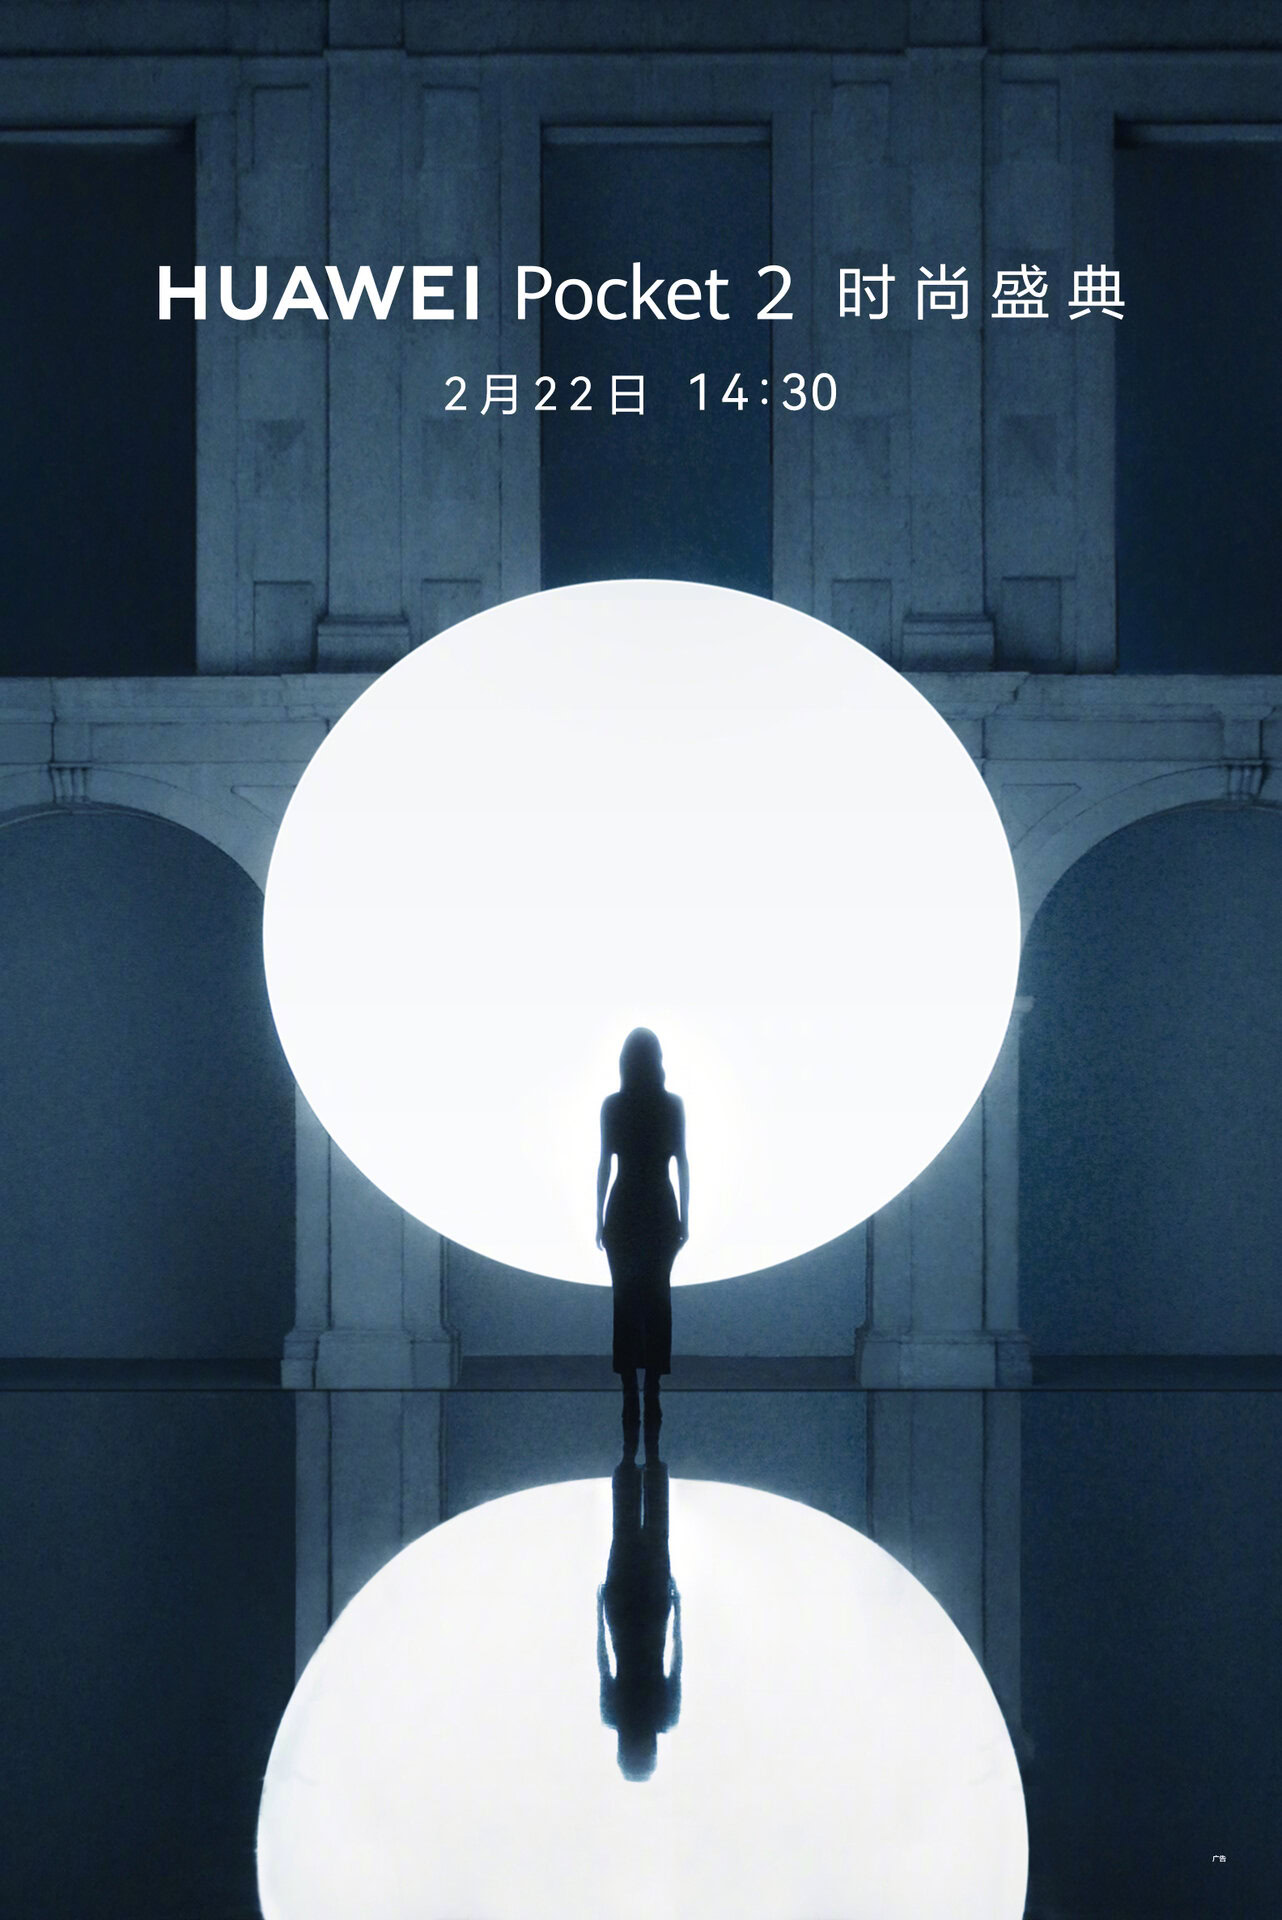 The HUAWEI Pocket S event poster.